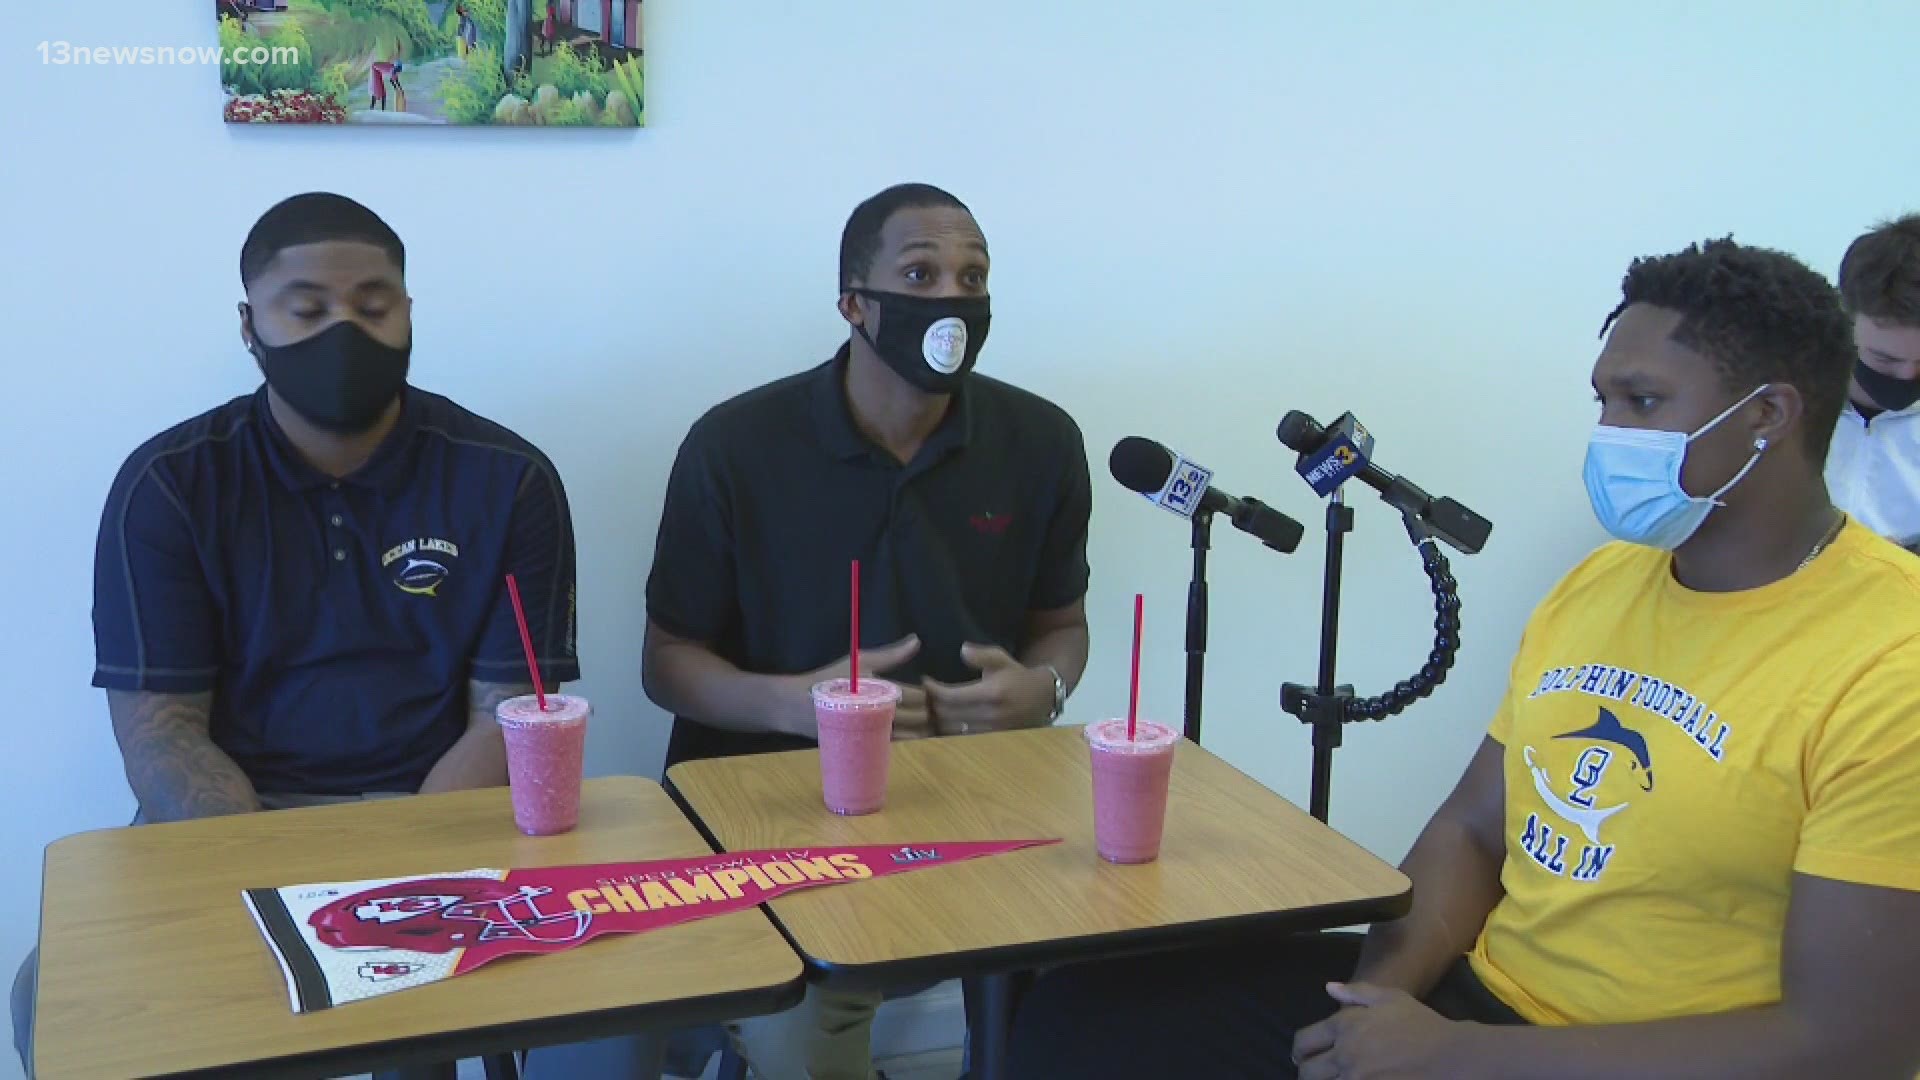 Derrick Nnadi's plays defense for the Kansas City Chiefs. His childhood friends teamed up with a smoothie restaurant to celebrate his accomplishments.